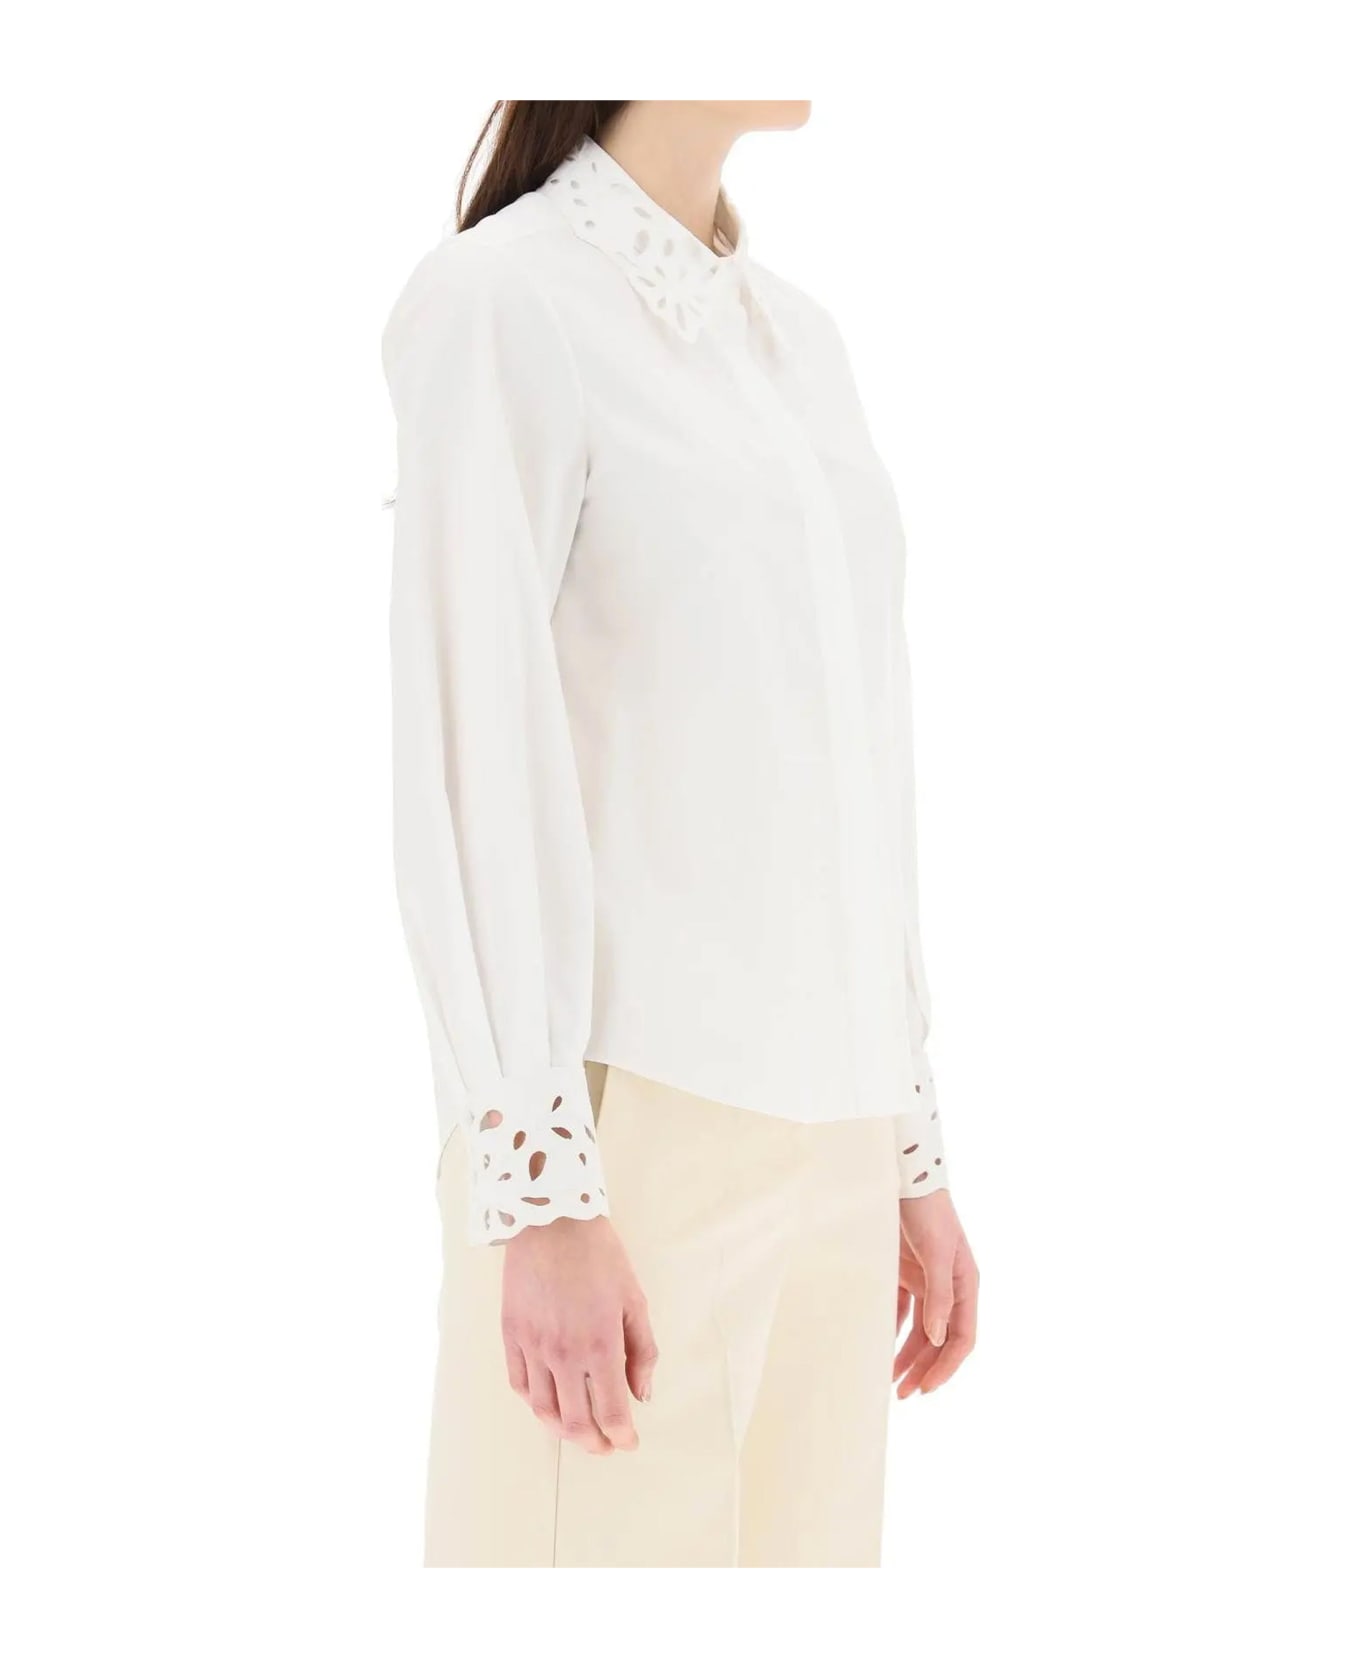 Chloé Cotton Embroidered Shirt - White ブラウス